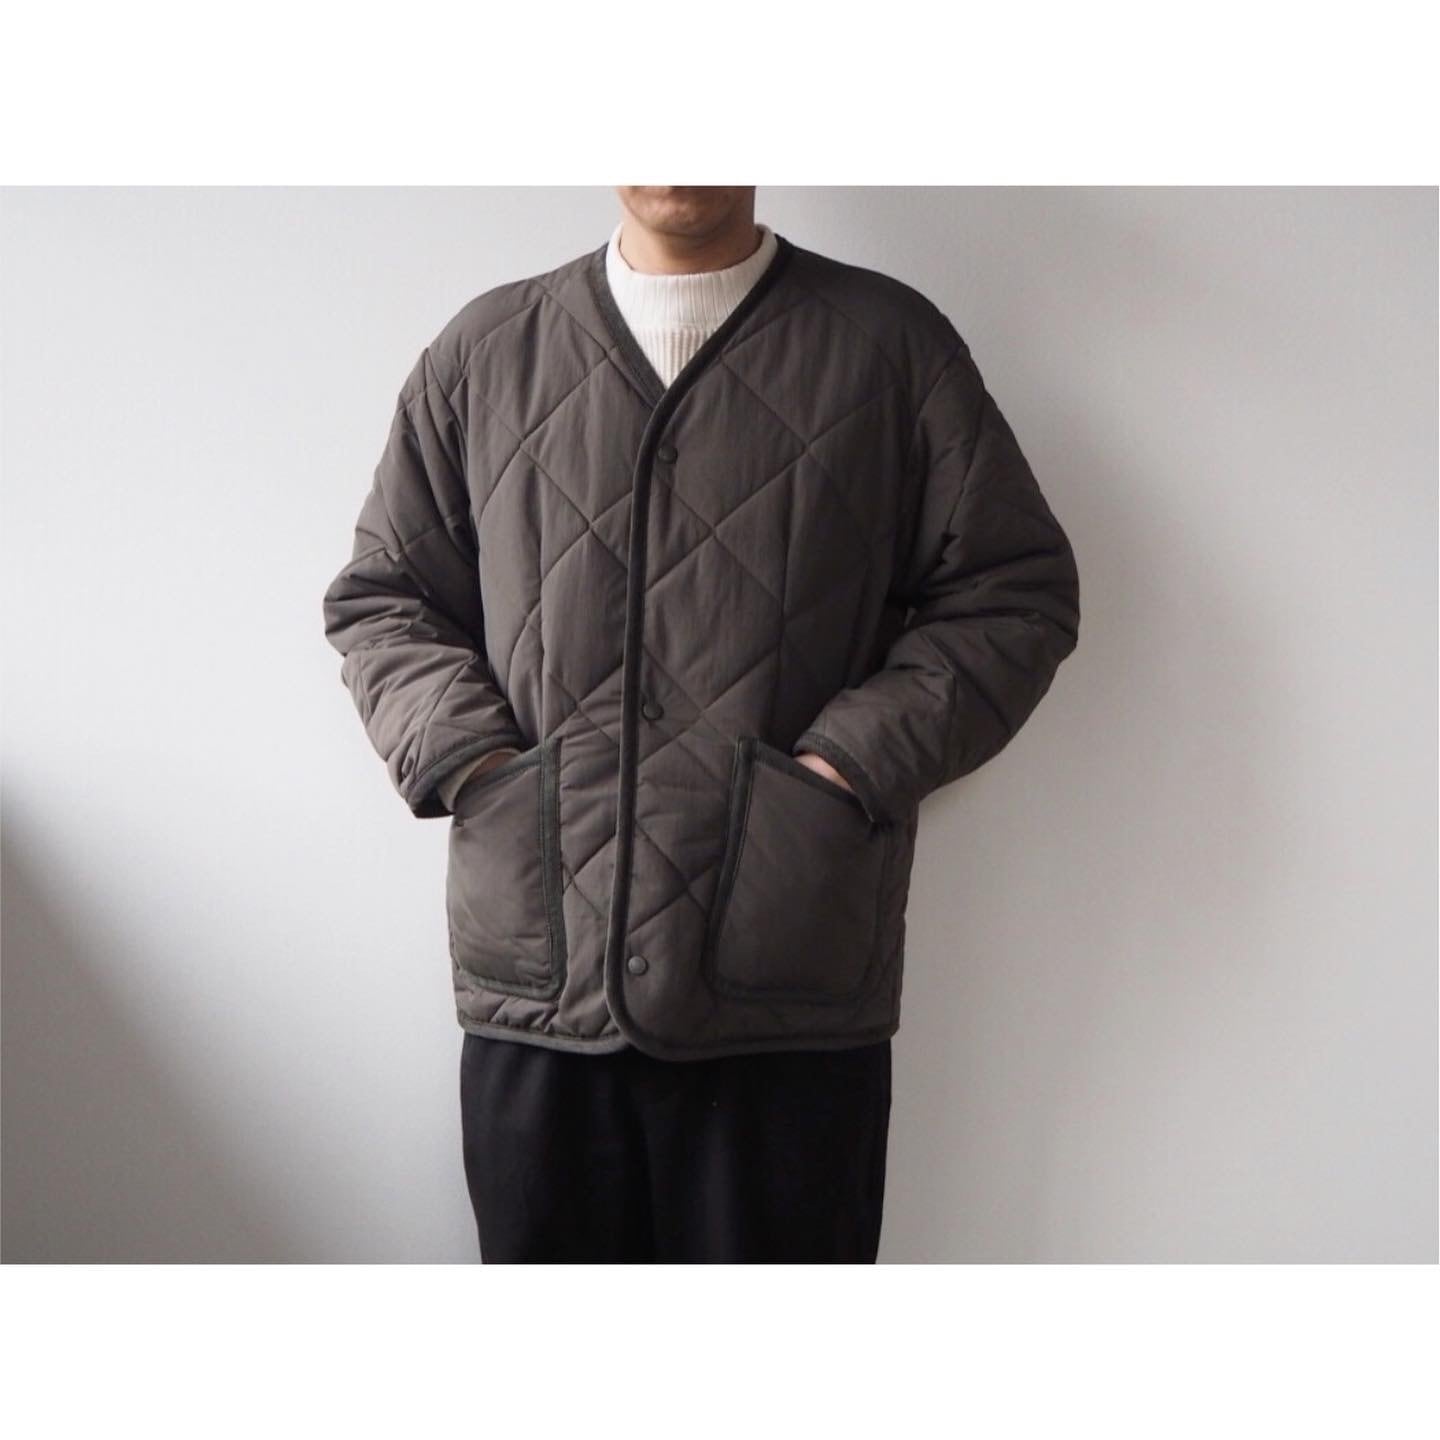 LAVENHAM (ラベンハム) Big Quilt Collarless Jacket | AUTHENTIC Life Store powered  by BASE